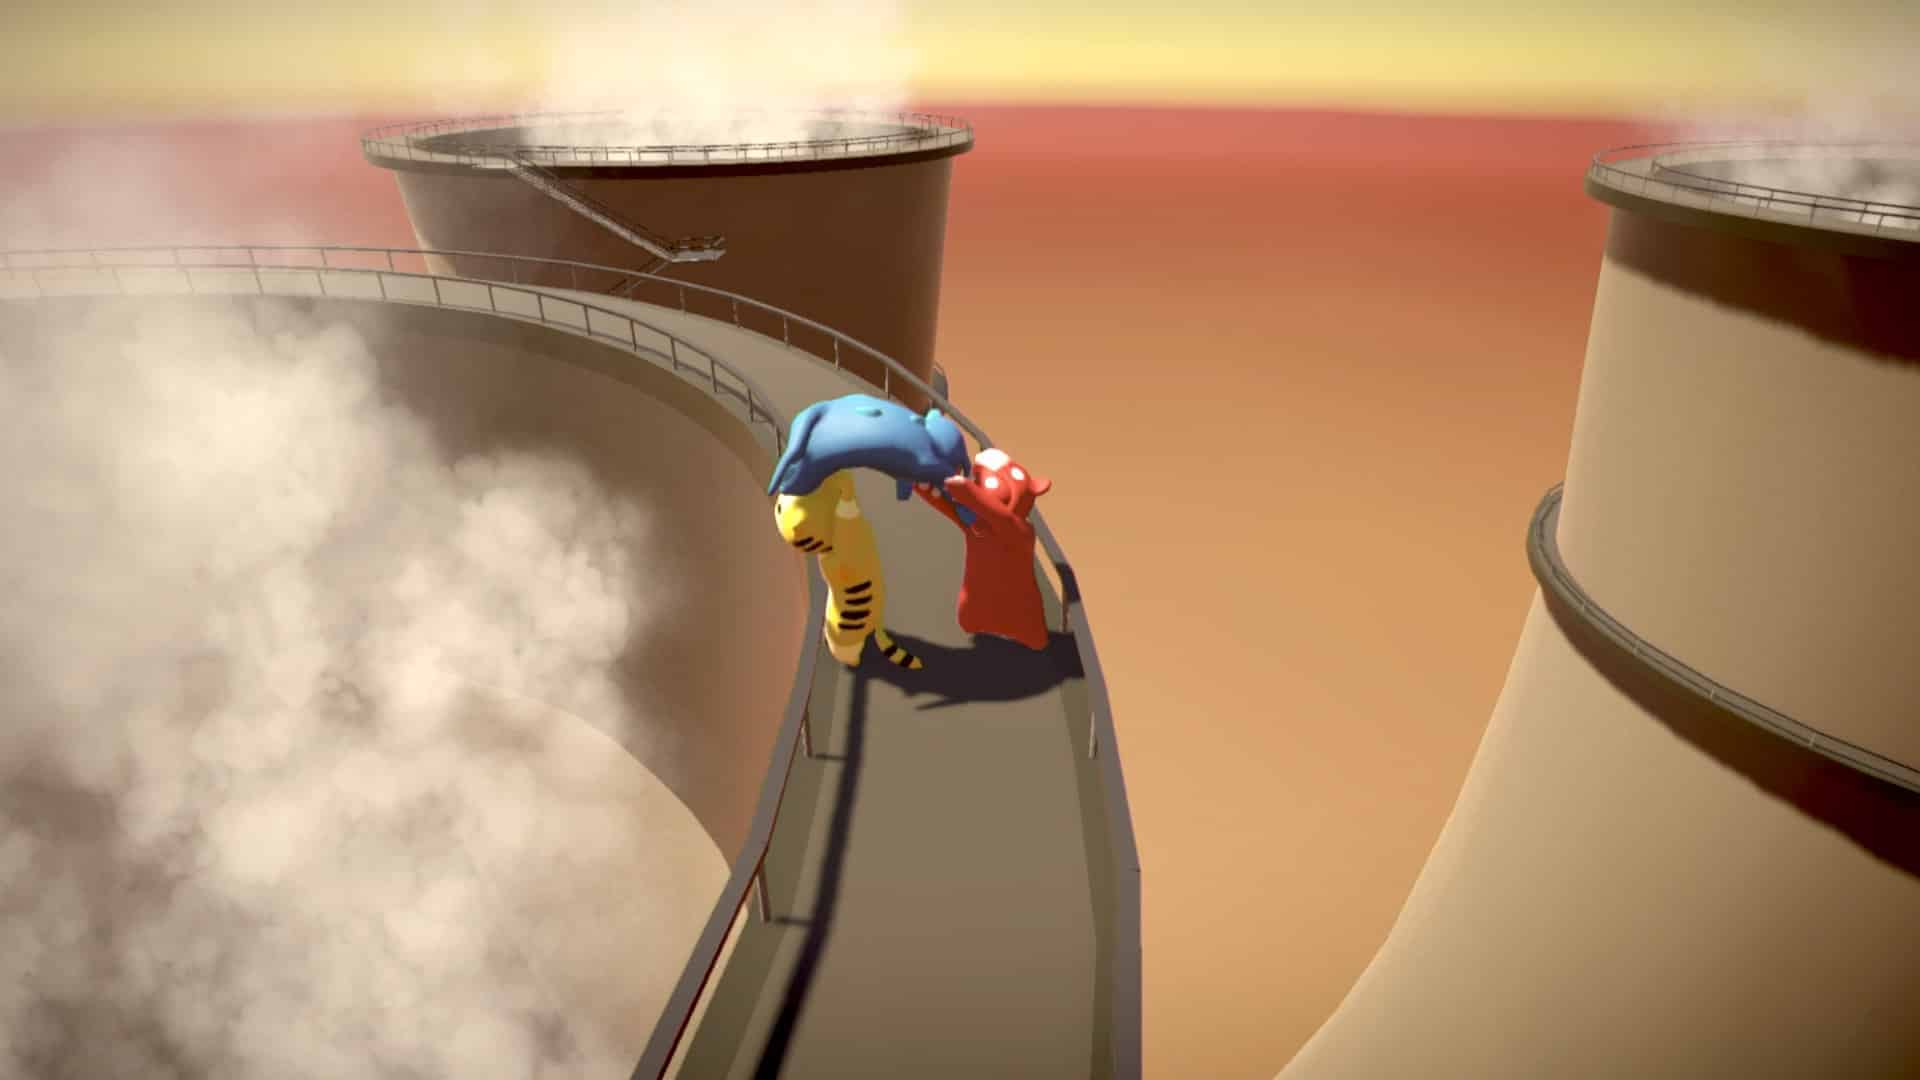 download gang beasts ps5 for free